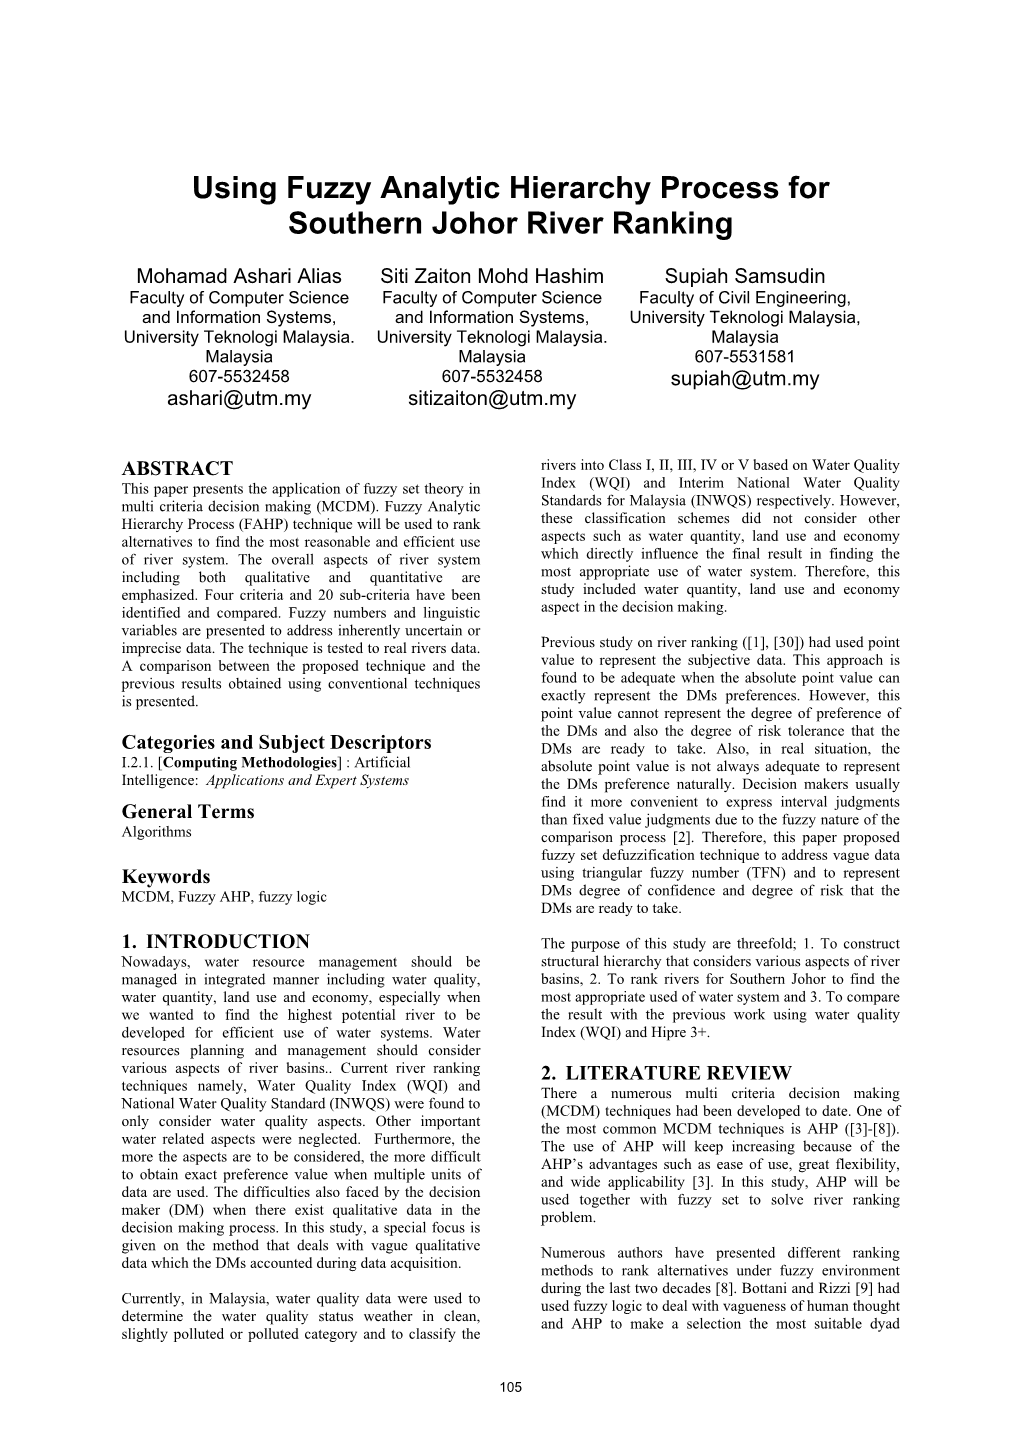 Using Fuzzy Analytic Hierarchy Process for Southern Johor River Ranking